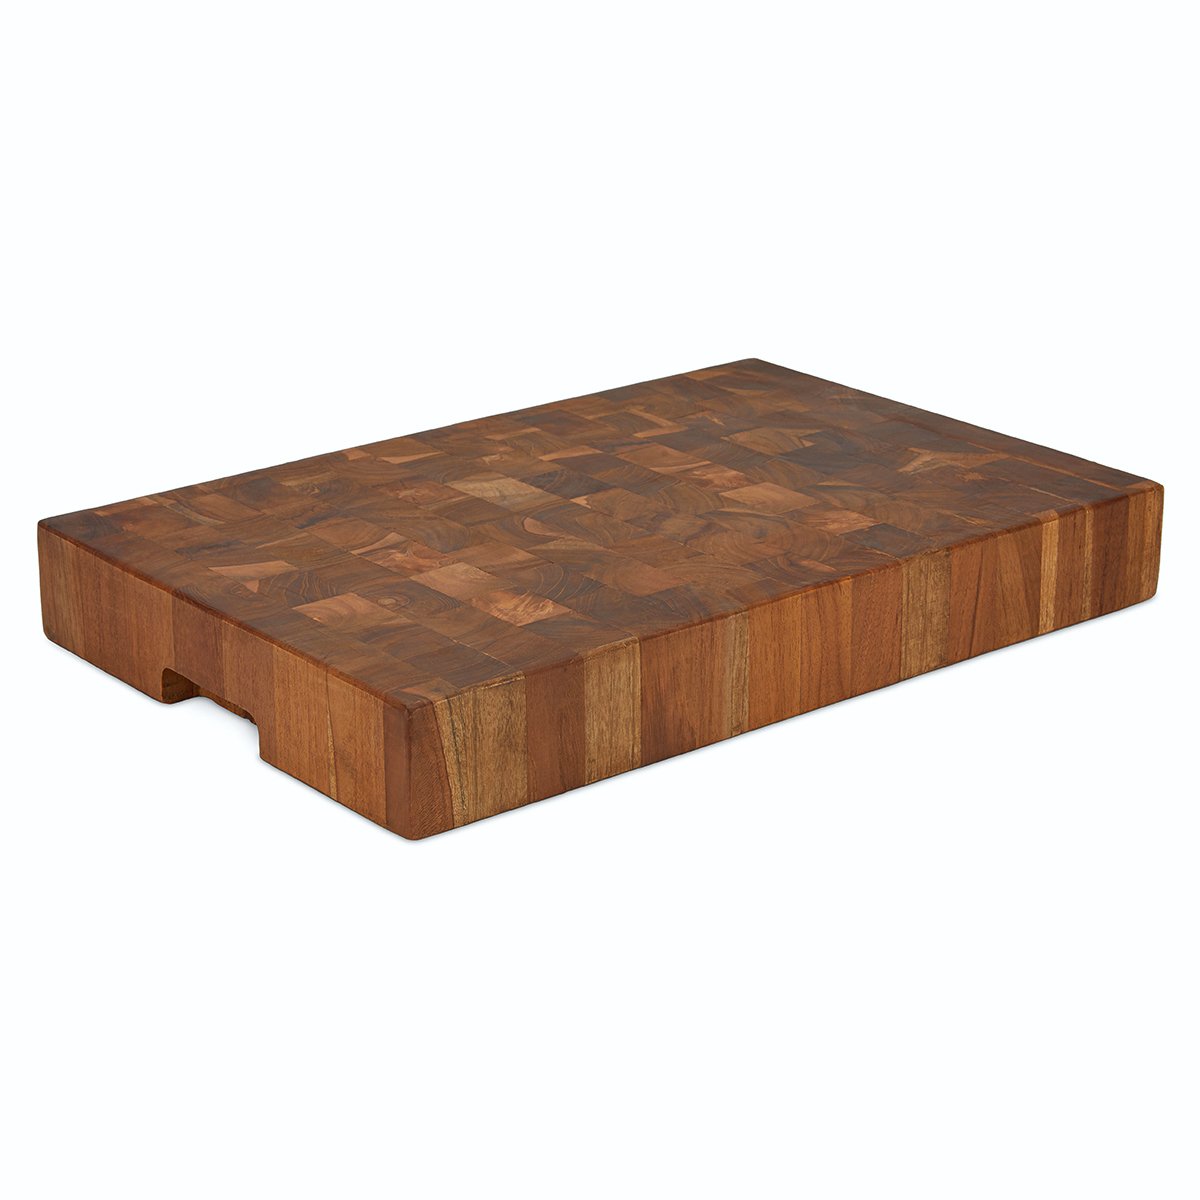 The den End Grain Teak Butcher Block - Carving Board for Kitchen (Extra-Thick 18 inch x 12 inch x 2.25 inch ), Size: 18 x 12 x 2.25, Brown